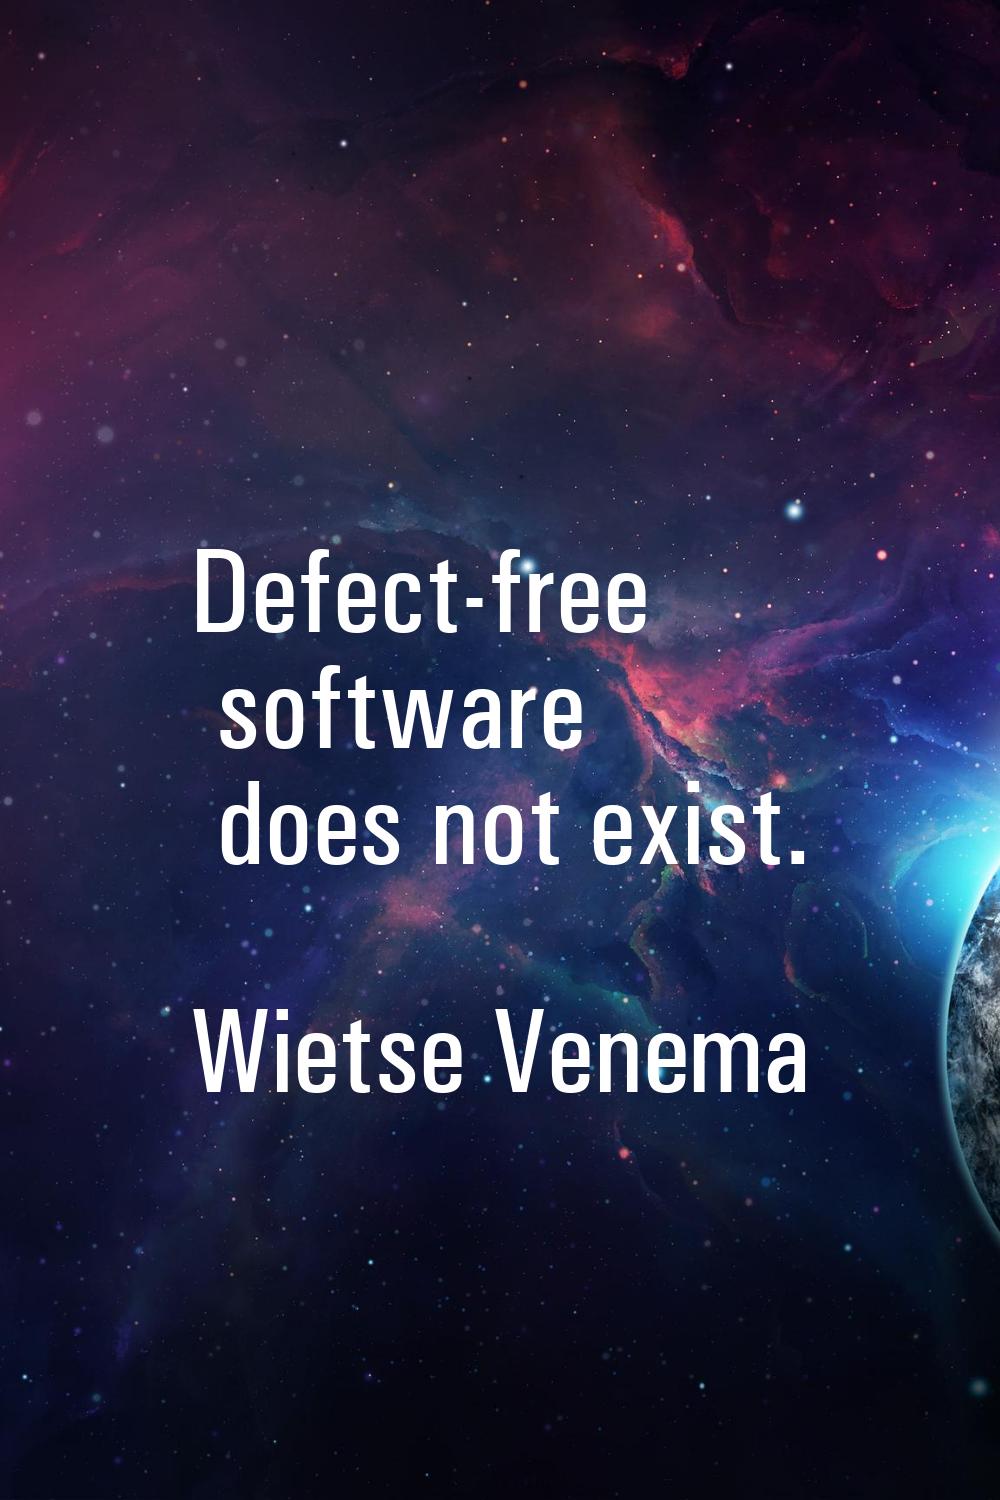 Defect-free software does not exist.